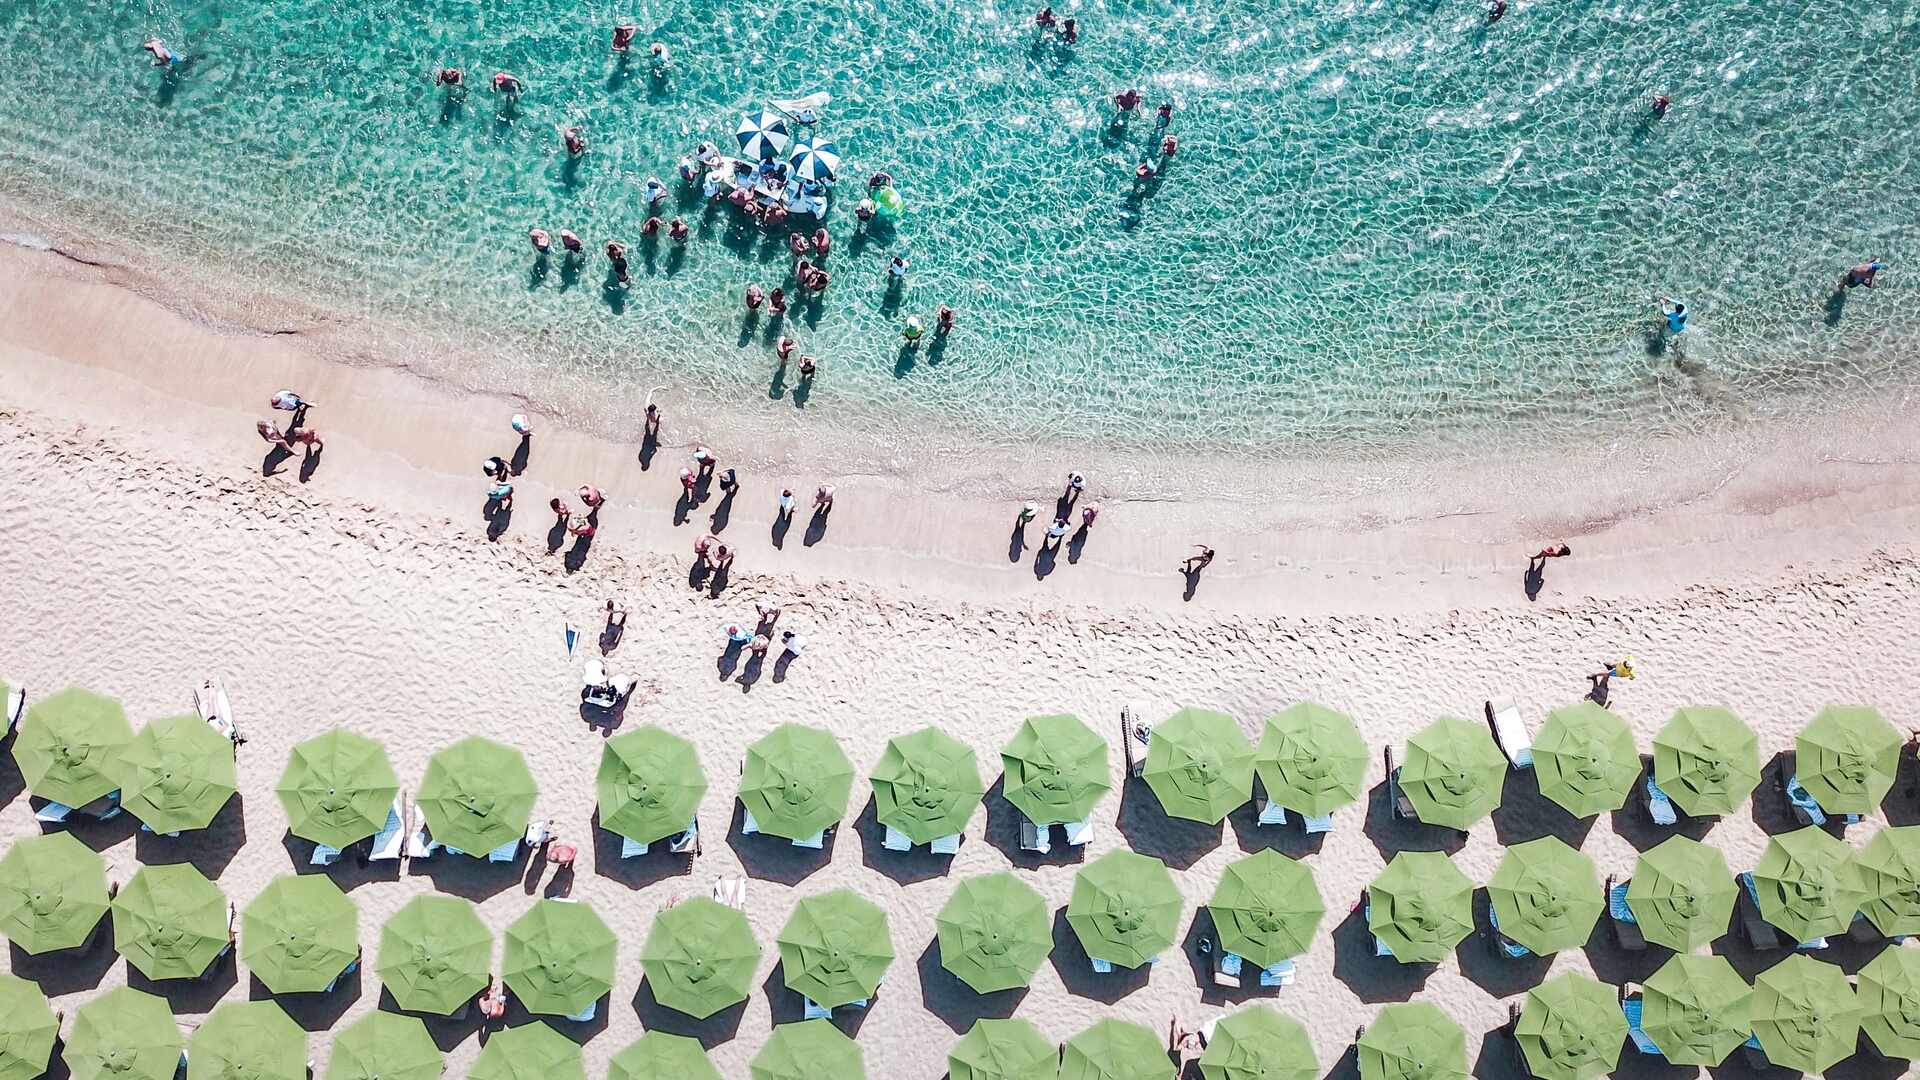 Birds eye view of rows of beach umbrellas and people on the sand and in the water